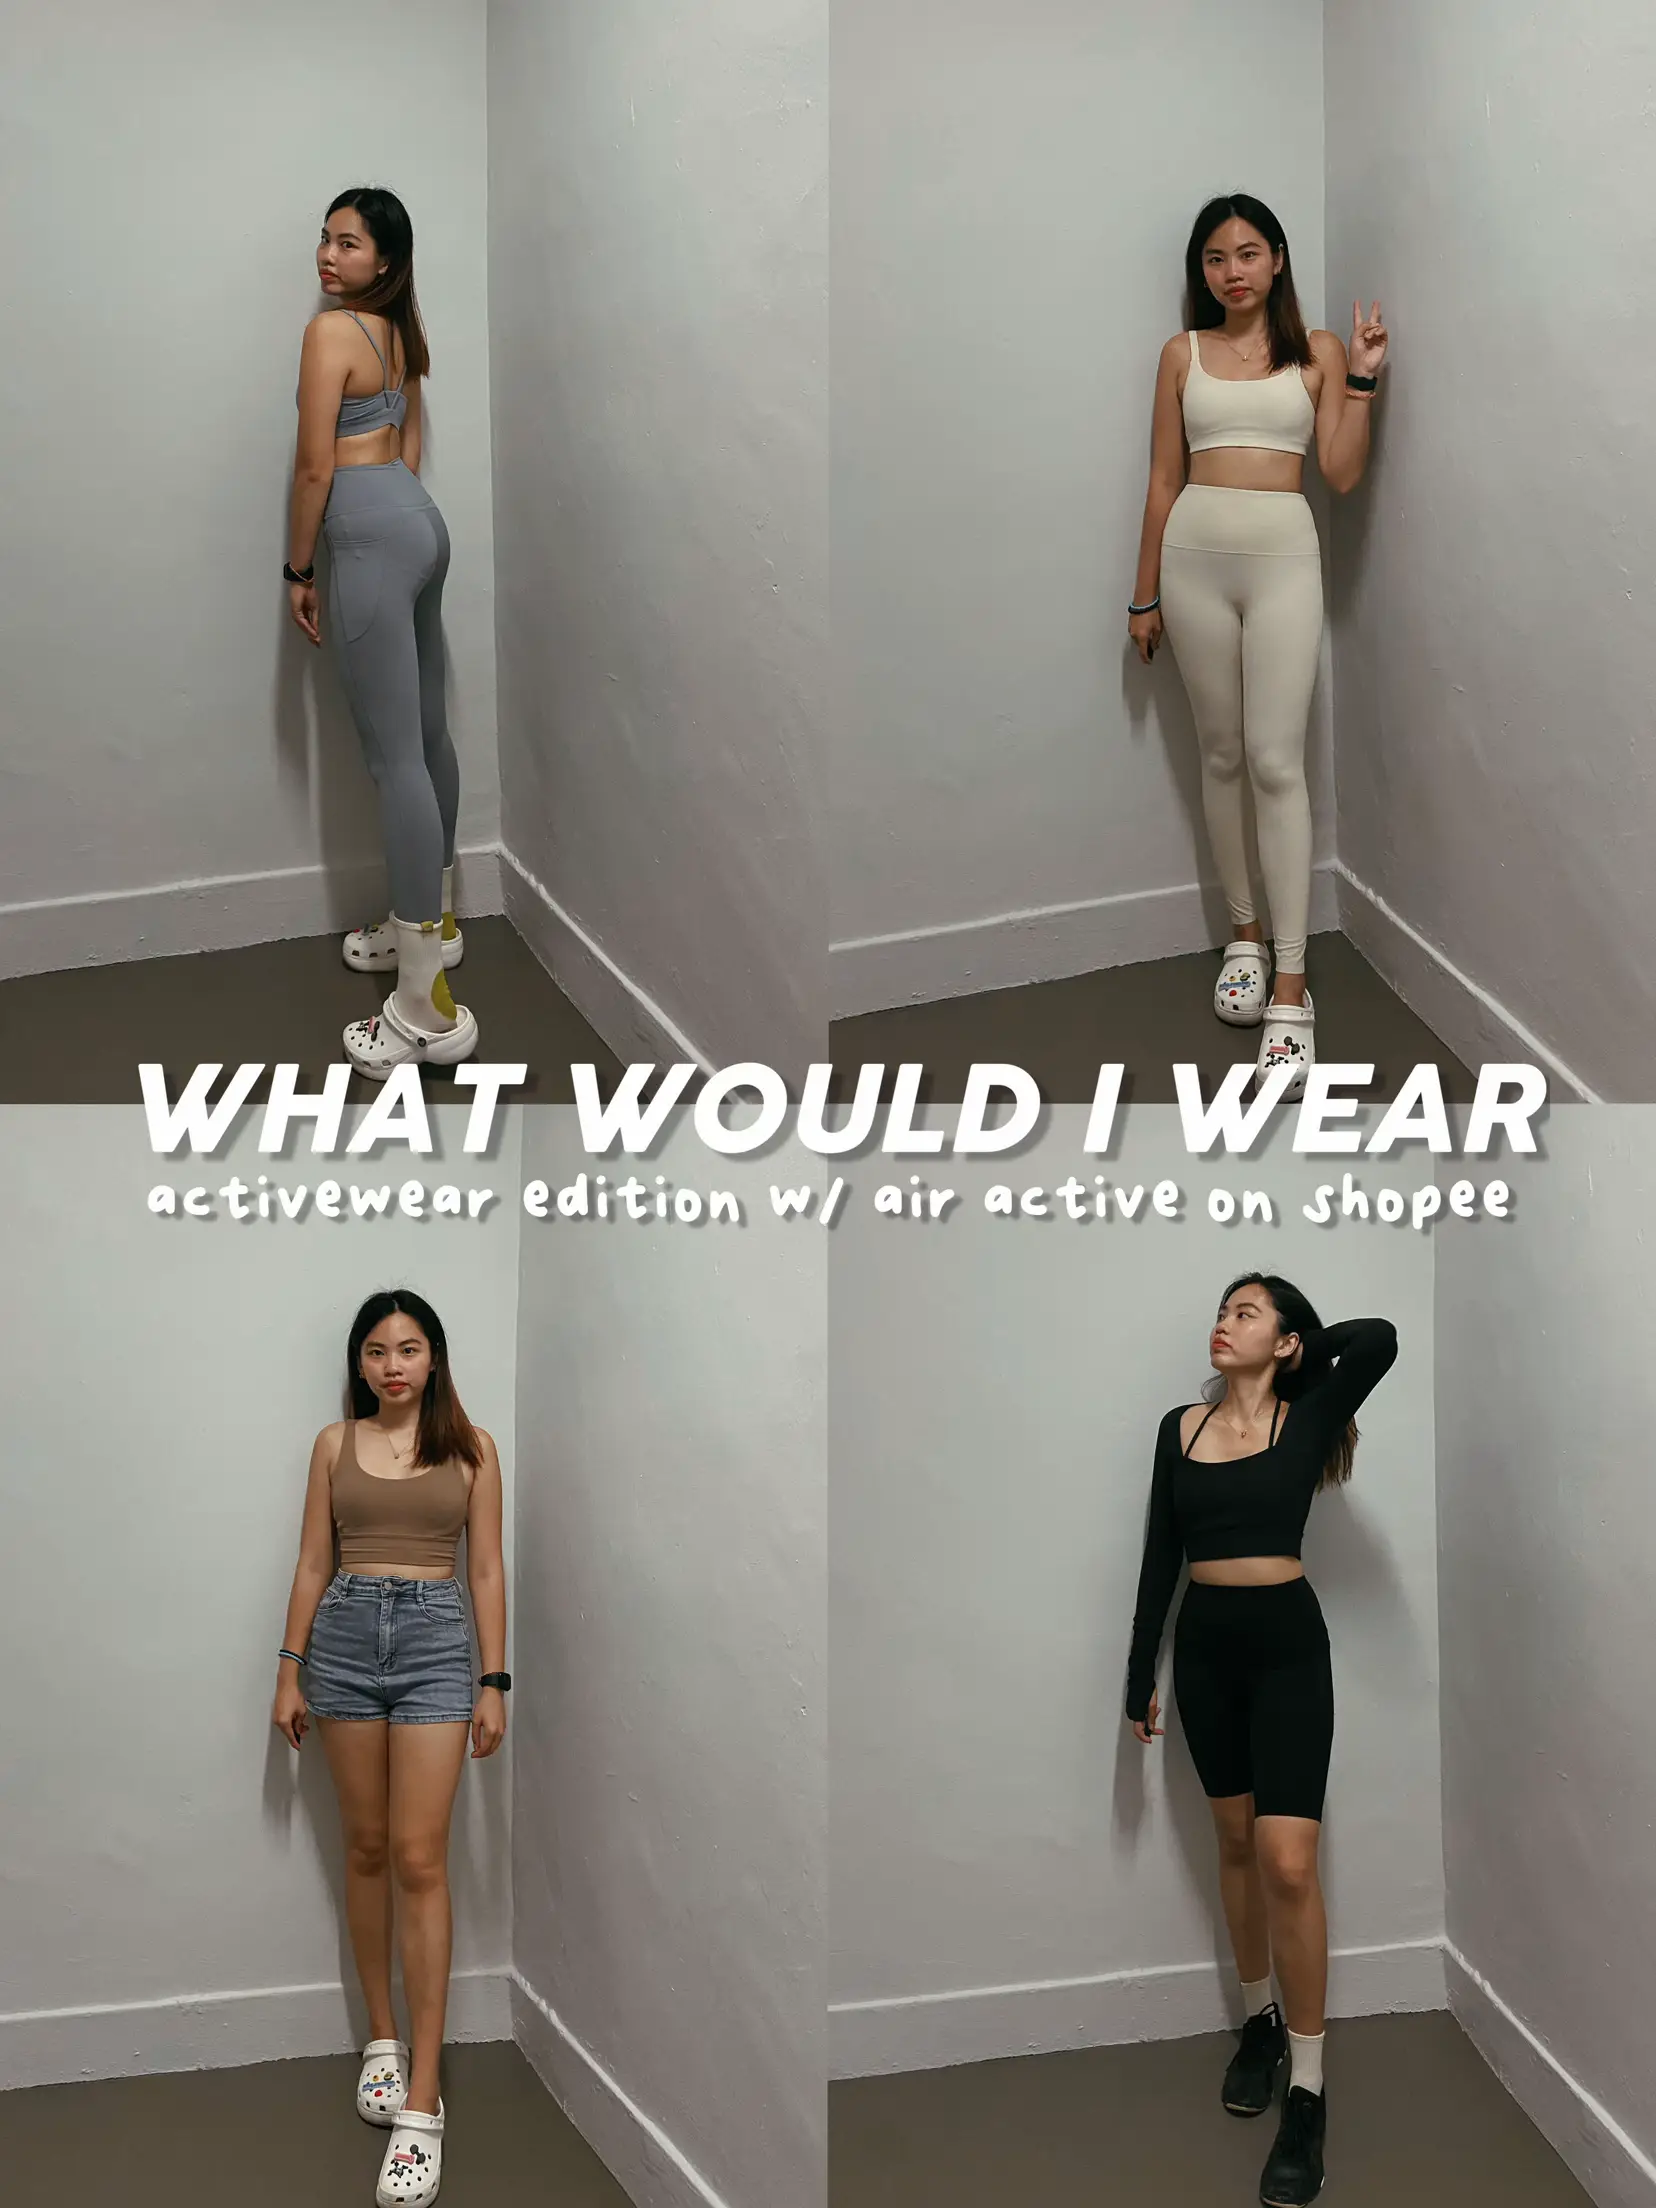 TESTING ACTIVEWEAR 2021, my honest review of AYBL